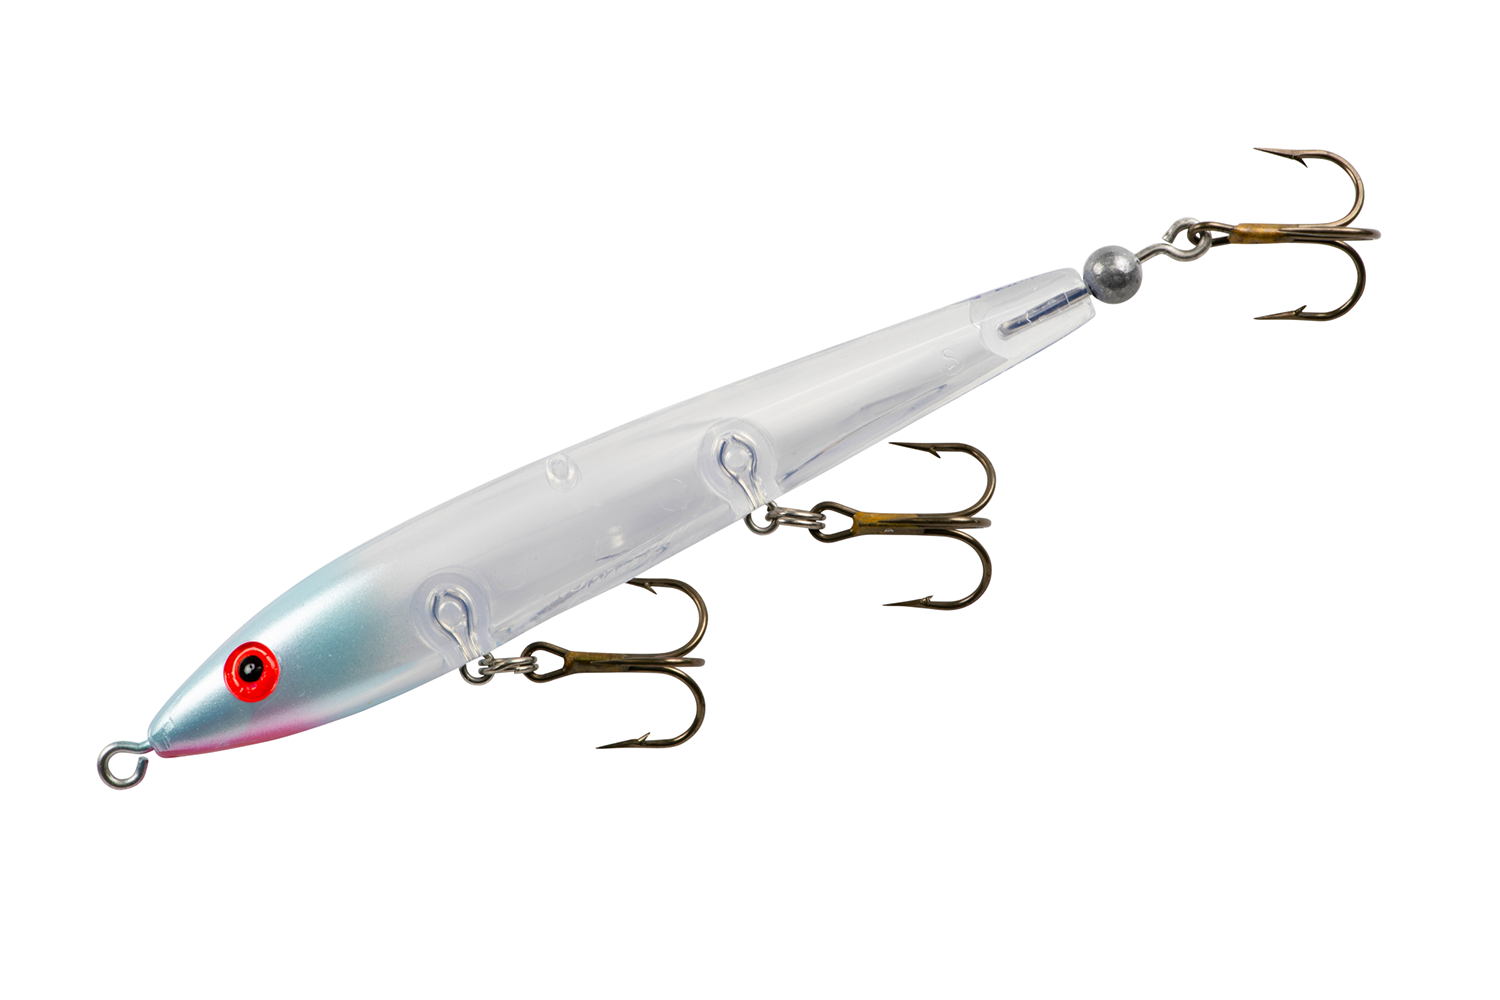 <p><b>Cotton Cordell Tail Weighted Boy Howdy </b></p>
<p>The Cotton Cordell Tail Weighted Boy Howdy is a bring back from the 90âs that will have many anglers delighted across the country! The tail weighted model is quite different from the current model that features spinners on the head and tail. The tail weighted version is just like it says in the name â tail weighted. It features a small lead weight on the tail that causes it to sit tail down and dart erratically with pops of the rod tip making it a perfect option for schooling fish. The lure comes in 10 different color patterns sure to match any forage base on your lake or river.</p>
<p><a href=